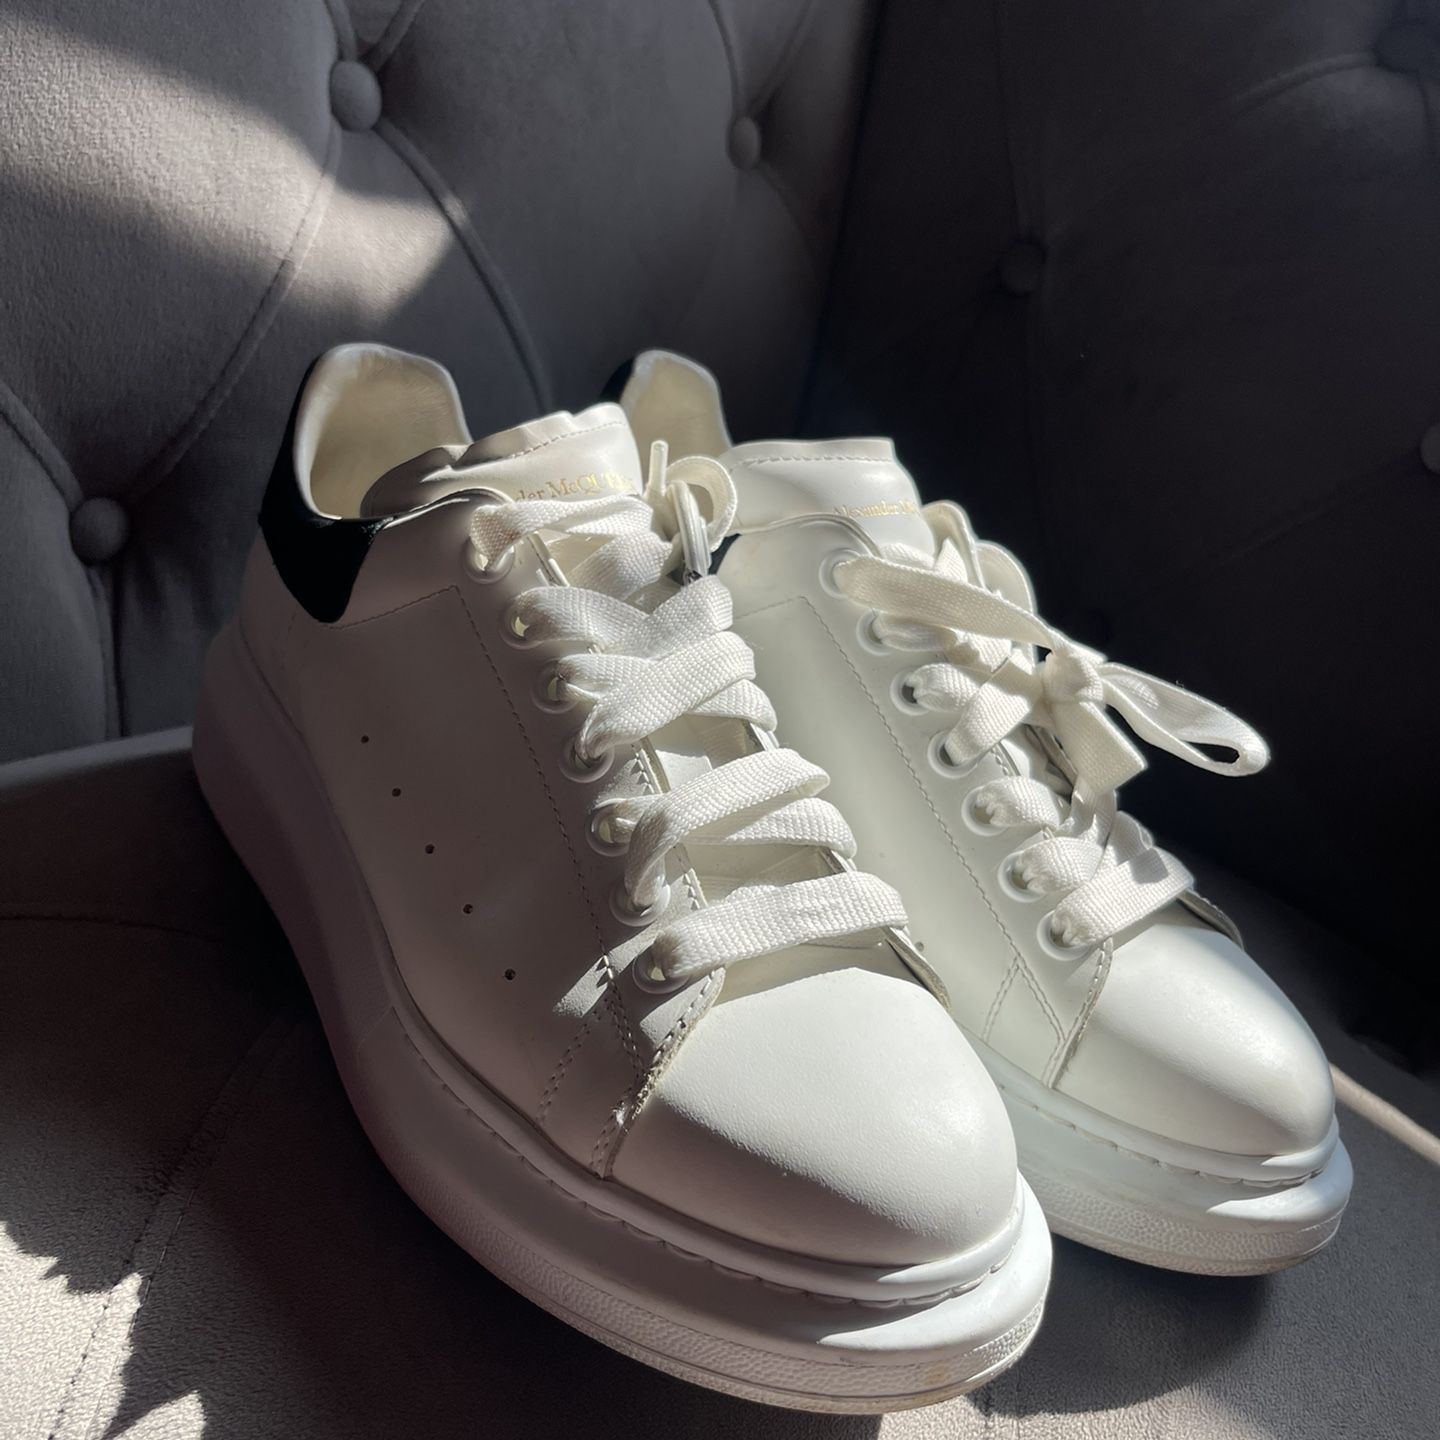 Alexander Mcqueen, Sneakers, And Fashion #nike #fashion #sneakers #trainers  #runningshoes #athle…